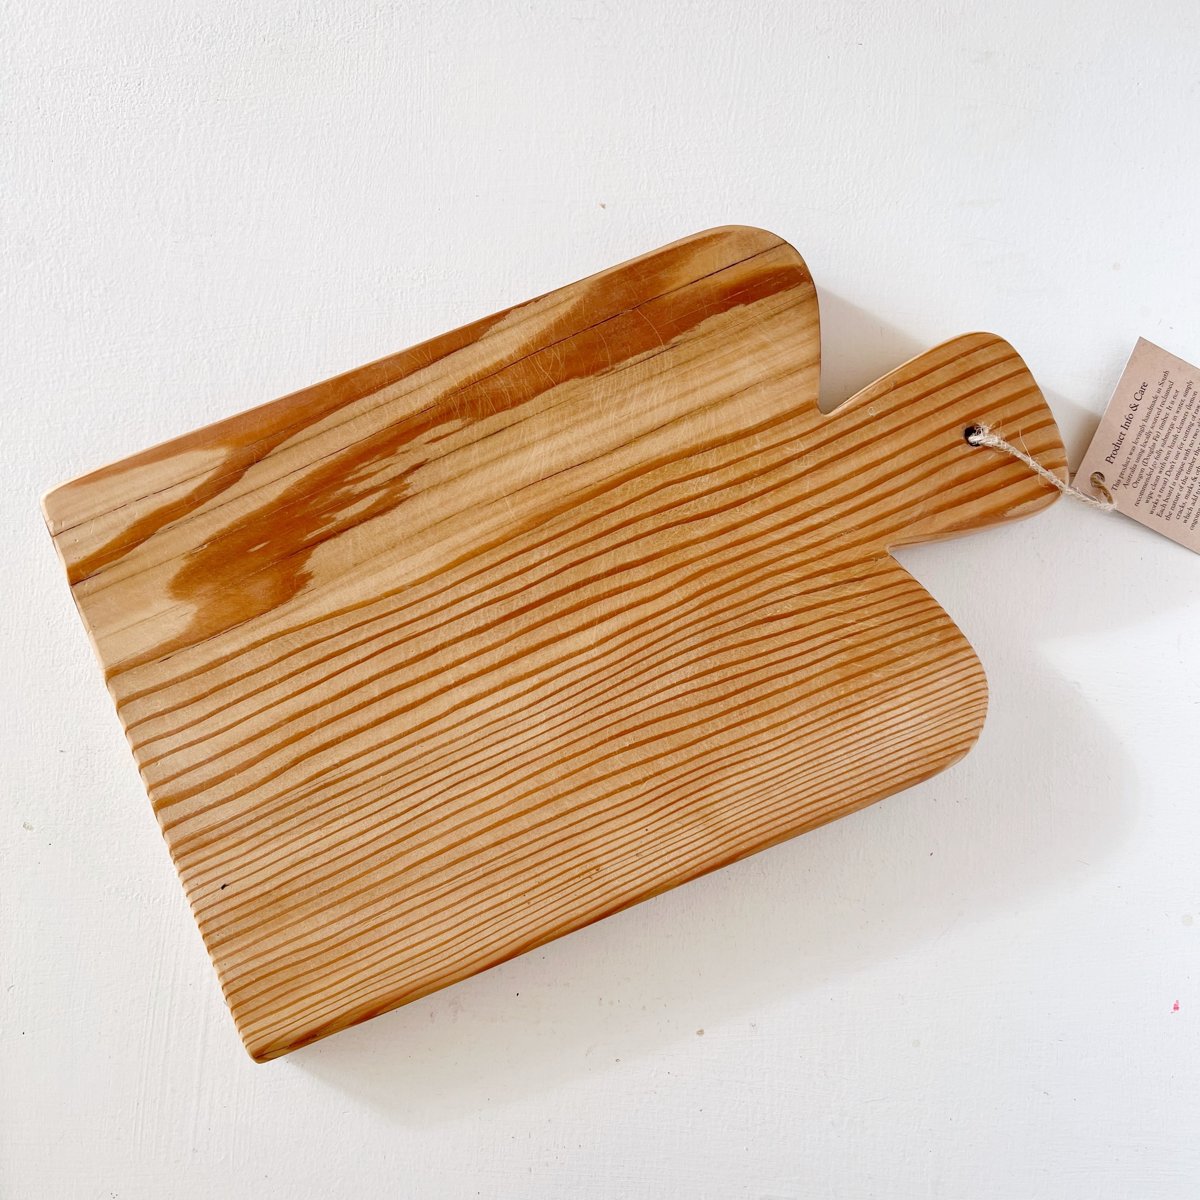 mondocherry - Ivy Alice | wooden serving board with curved corners | Medium - front